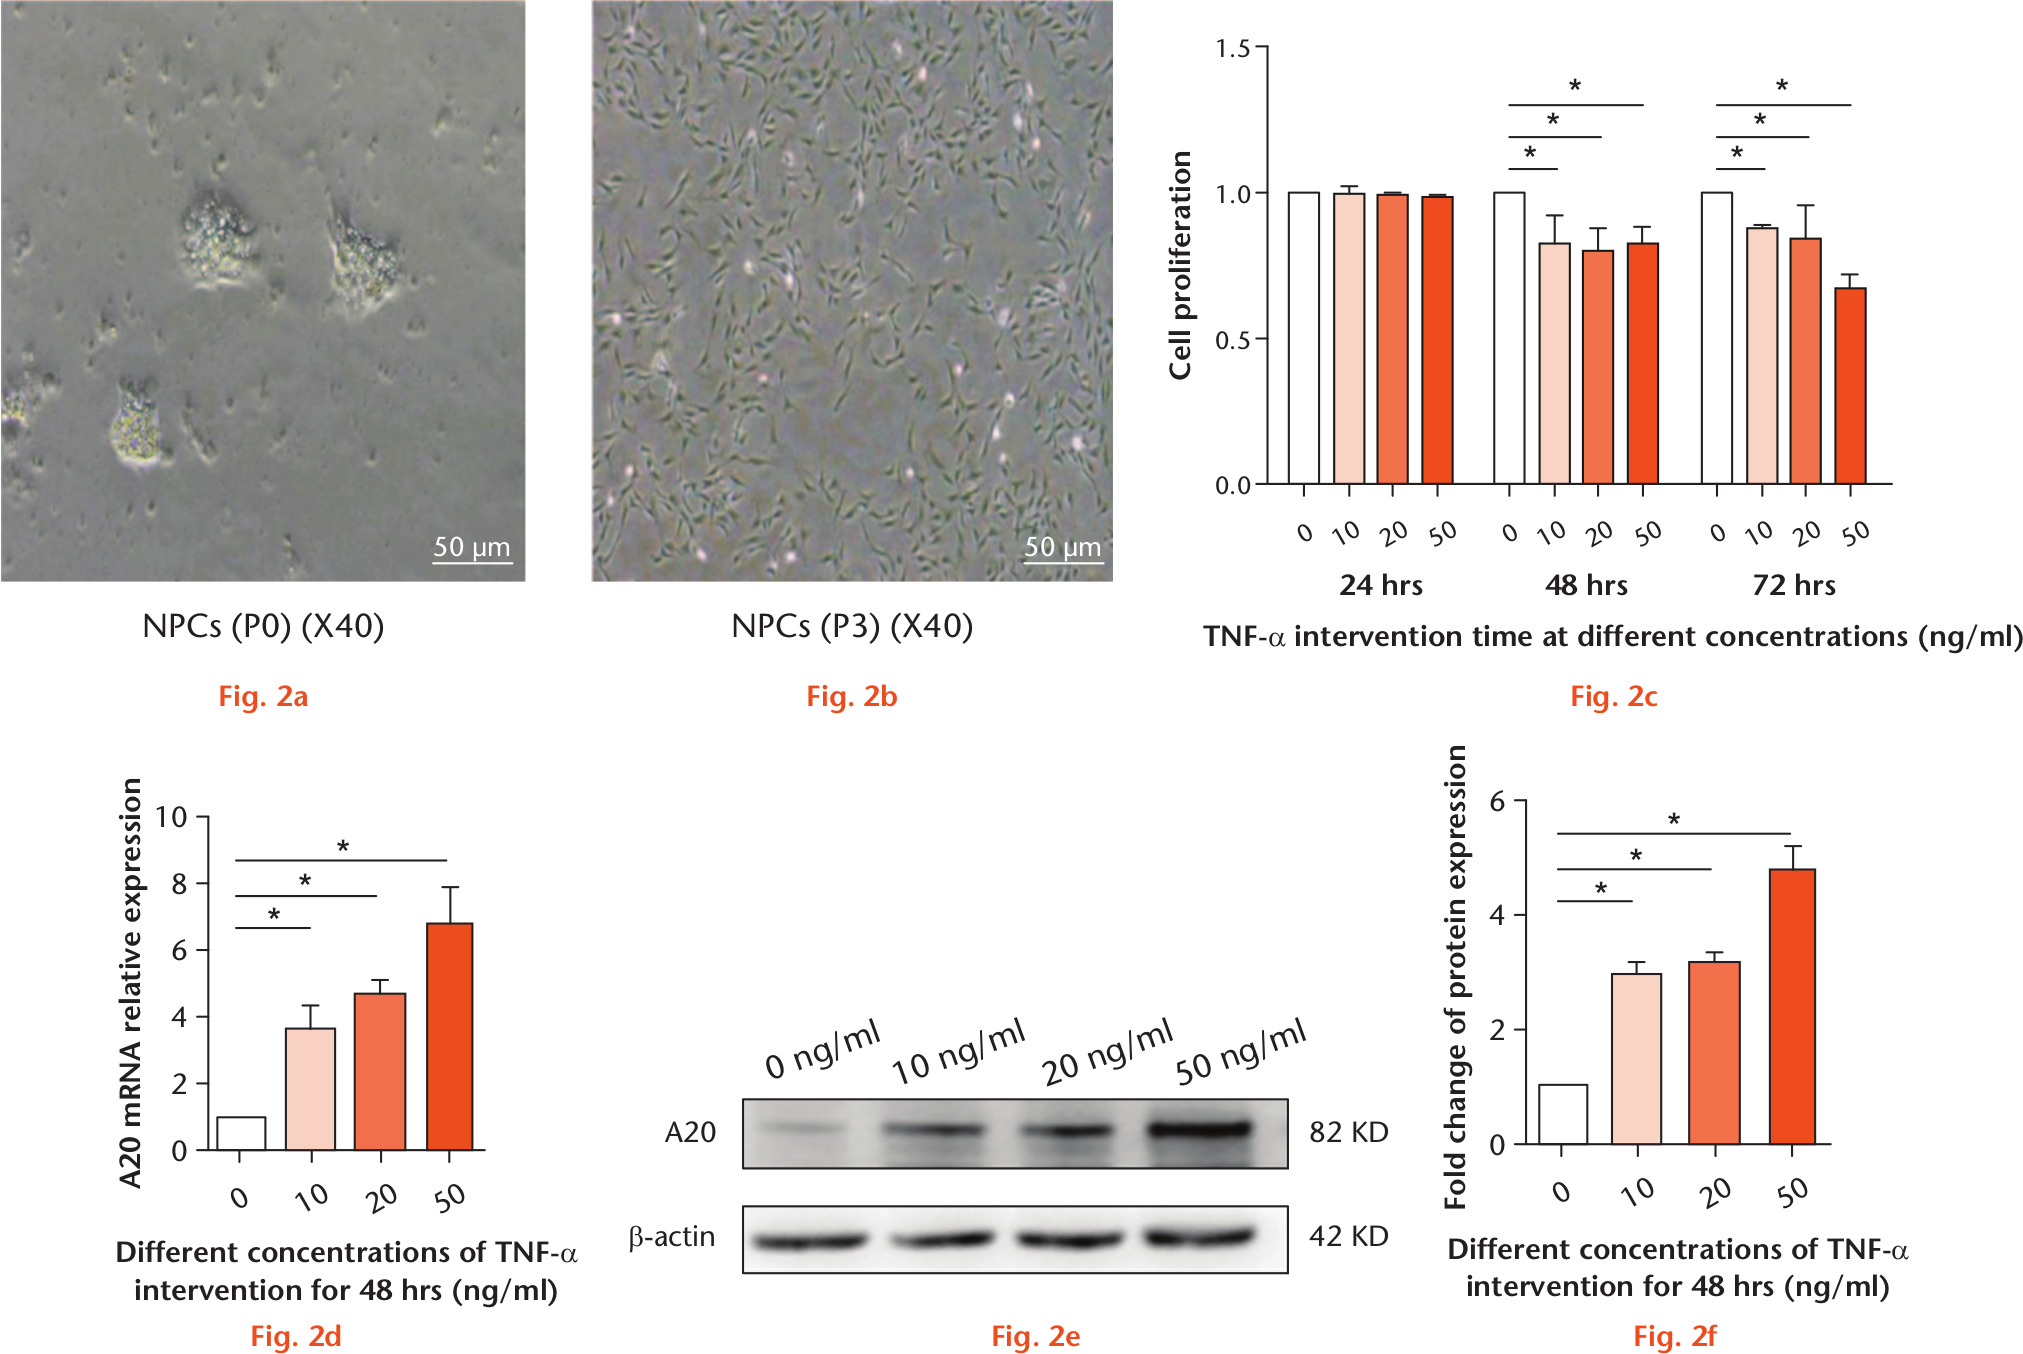 Fig. 2 
            Acquisition of rat nucleus pulposus cells (NPCs) and identification of A20 expression in tumour necrosis factor alpha (TNF-α)-induced NPCs. a) Primary NPCs. b) P3 NPCs. c) The cell viability of NPCs induced by TNF-α was evaluated. d) The messenger RNA (mRNA) expression of A20 in NPCs was evaluated by real-time polymerase chain reaction (PCR). e) The expression of A20 from TNF-α-induced NPCs was analyzed by western blot. f) Quantification of immunoblots of A20. Magnification: 127 mm × 71 mm (300 × 300 DPI). Data are expressed as means (SDs; n = 3). *p < 0.05.
          